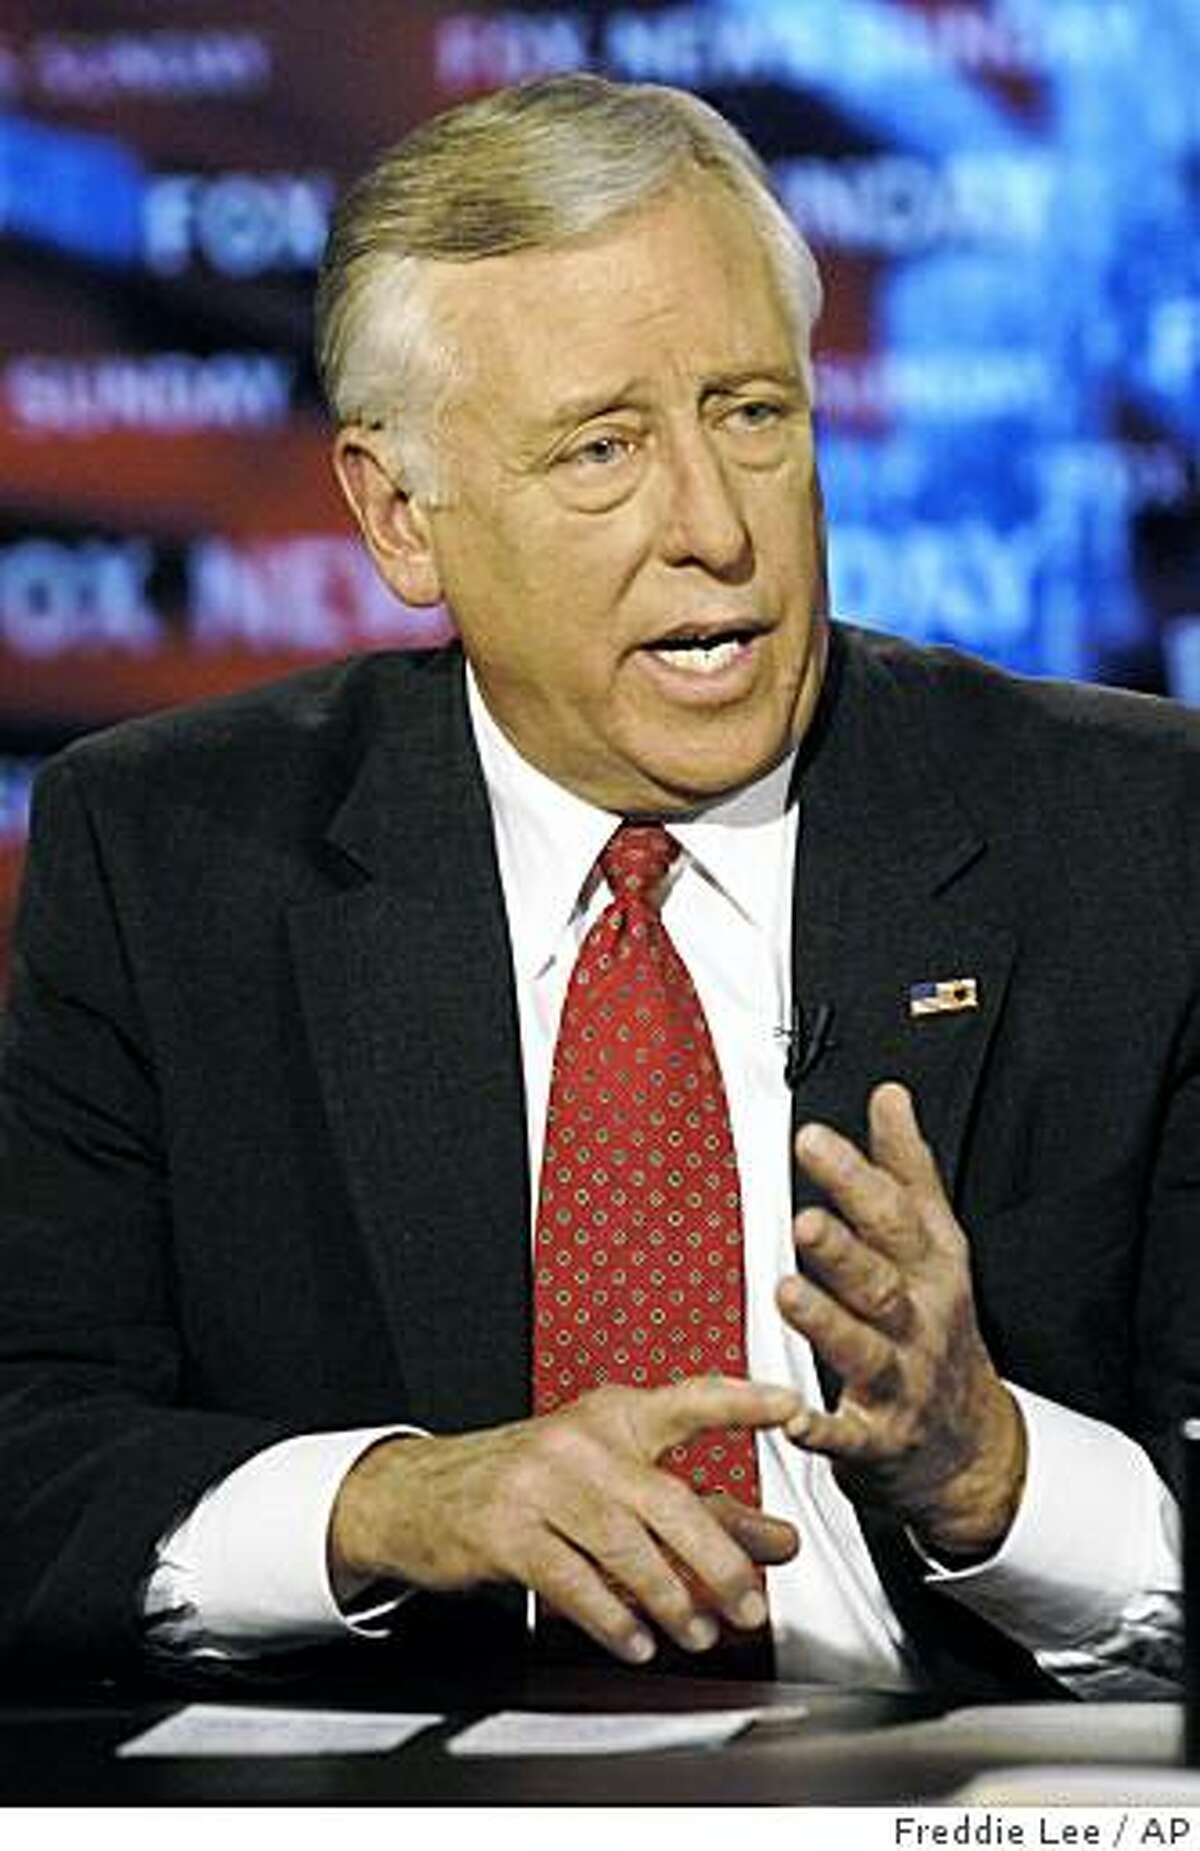 In this photo provided by FOX News, House Majority Leader Steny Hoyer, D-Md., appears on "Fox News Sunday" in Washington, Sunday, Jan. 7, 2007. (AP Photo/FOX News Sunday, Freddie Lee